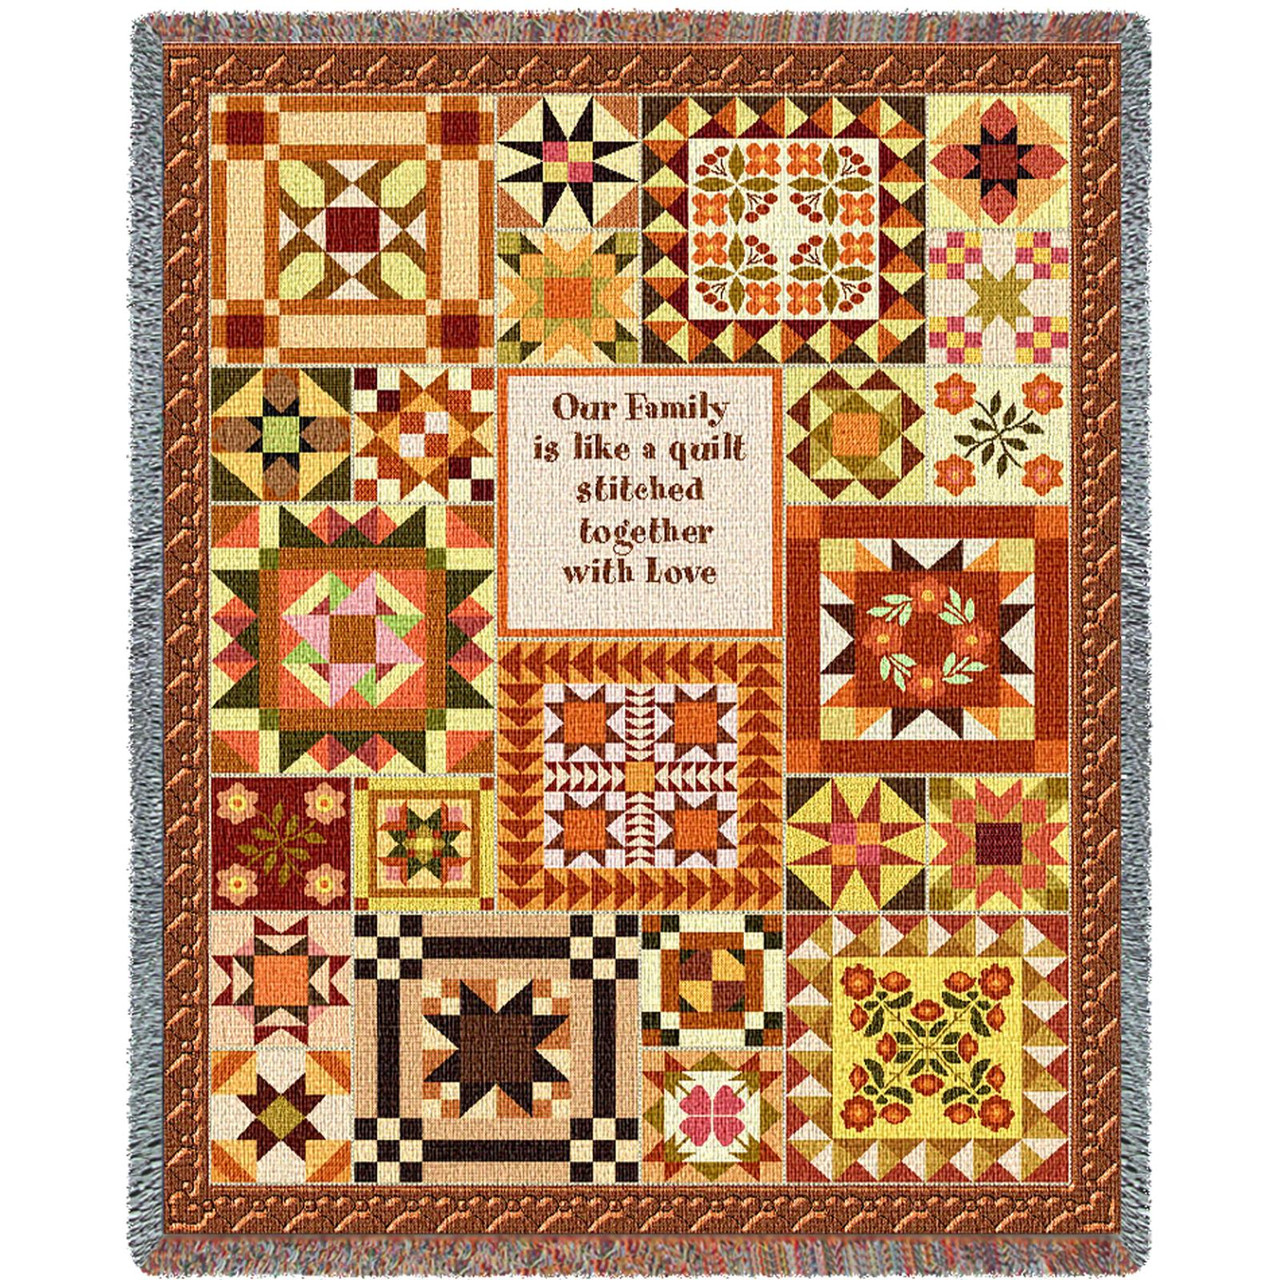 Our Family Is Like a Quilt Stitched Together With Love Cotton Woven  Blanket Throw Made in the USA (72x54)